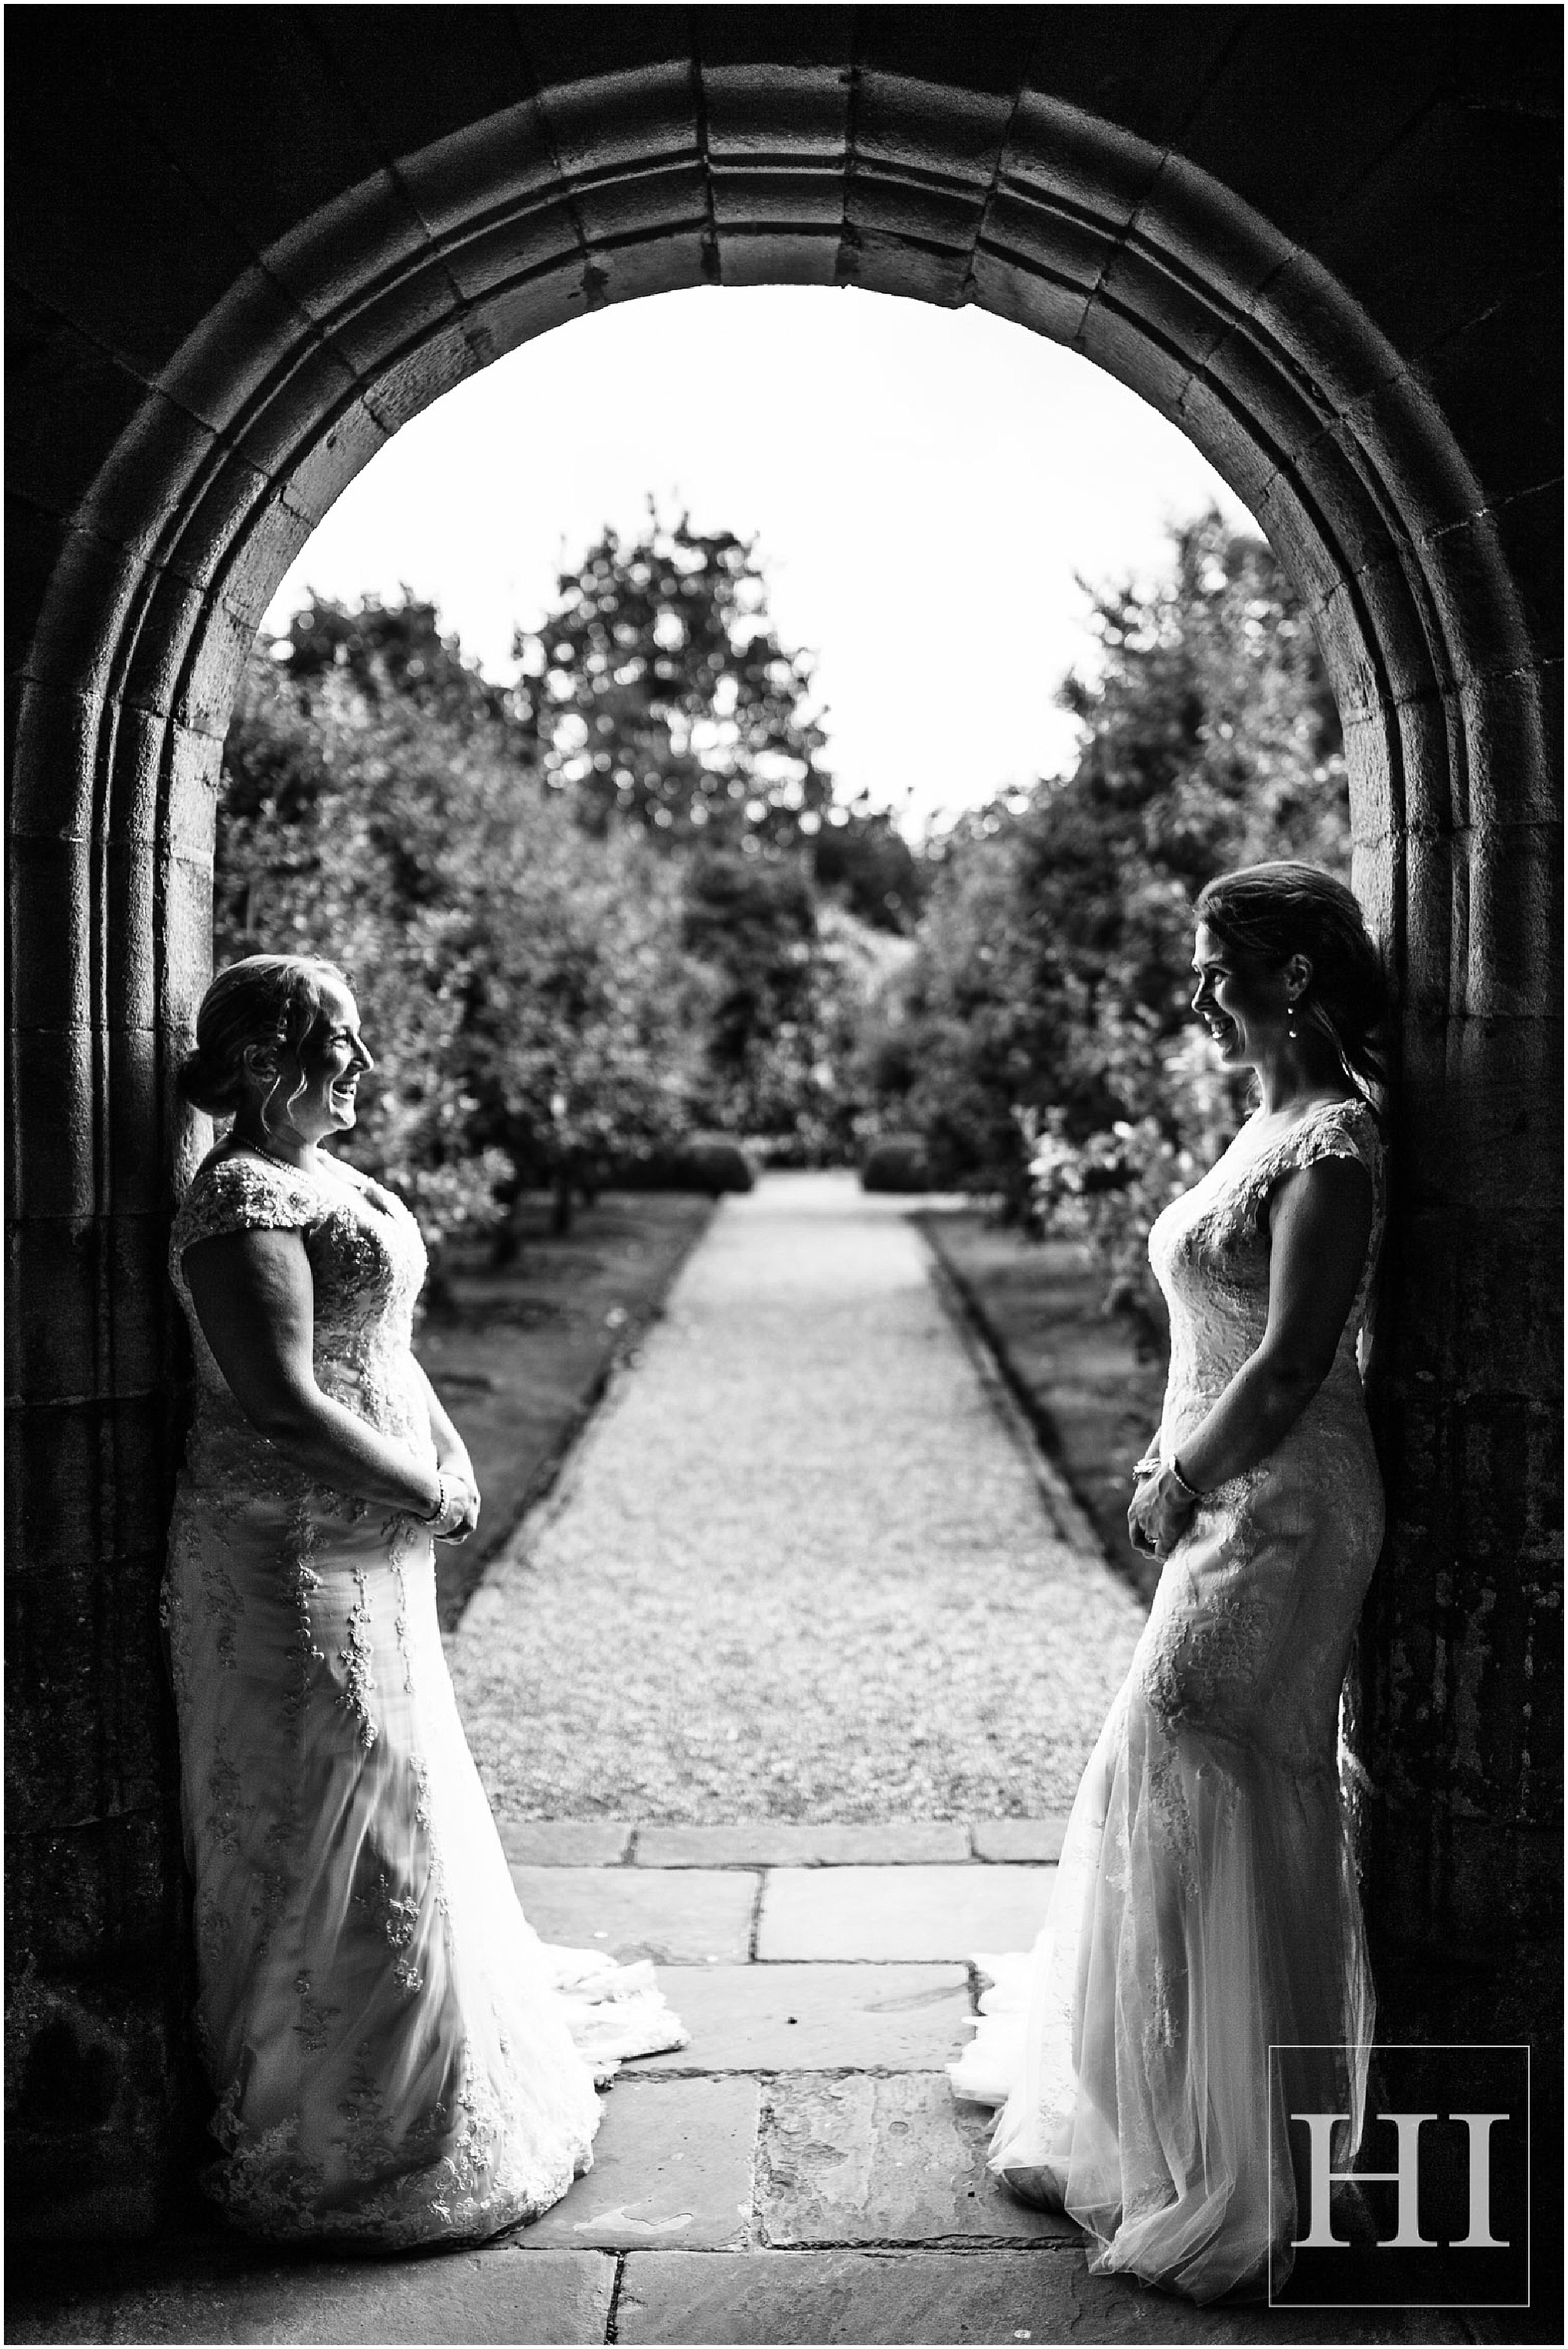 East Riddlesden Hall Wedding Photography Hamish Irvine Photographer Hamish Irvine photography yorkshire wedding photographers yorkshire wedding venues leeds wedding photographer leeds wedding photography barn wedding photographer yorkshire barn wedding photographer national trust wedding same sex wedding photographer leeds same sex wedding gay wedding photographer same sex photography east riddlesden same sex wedding london wedding photographer same sex barn wedding eat me drink me caterers hollins hall hotel typical type 